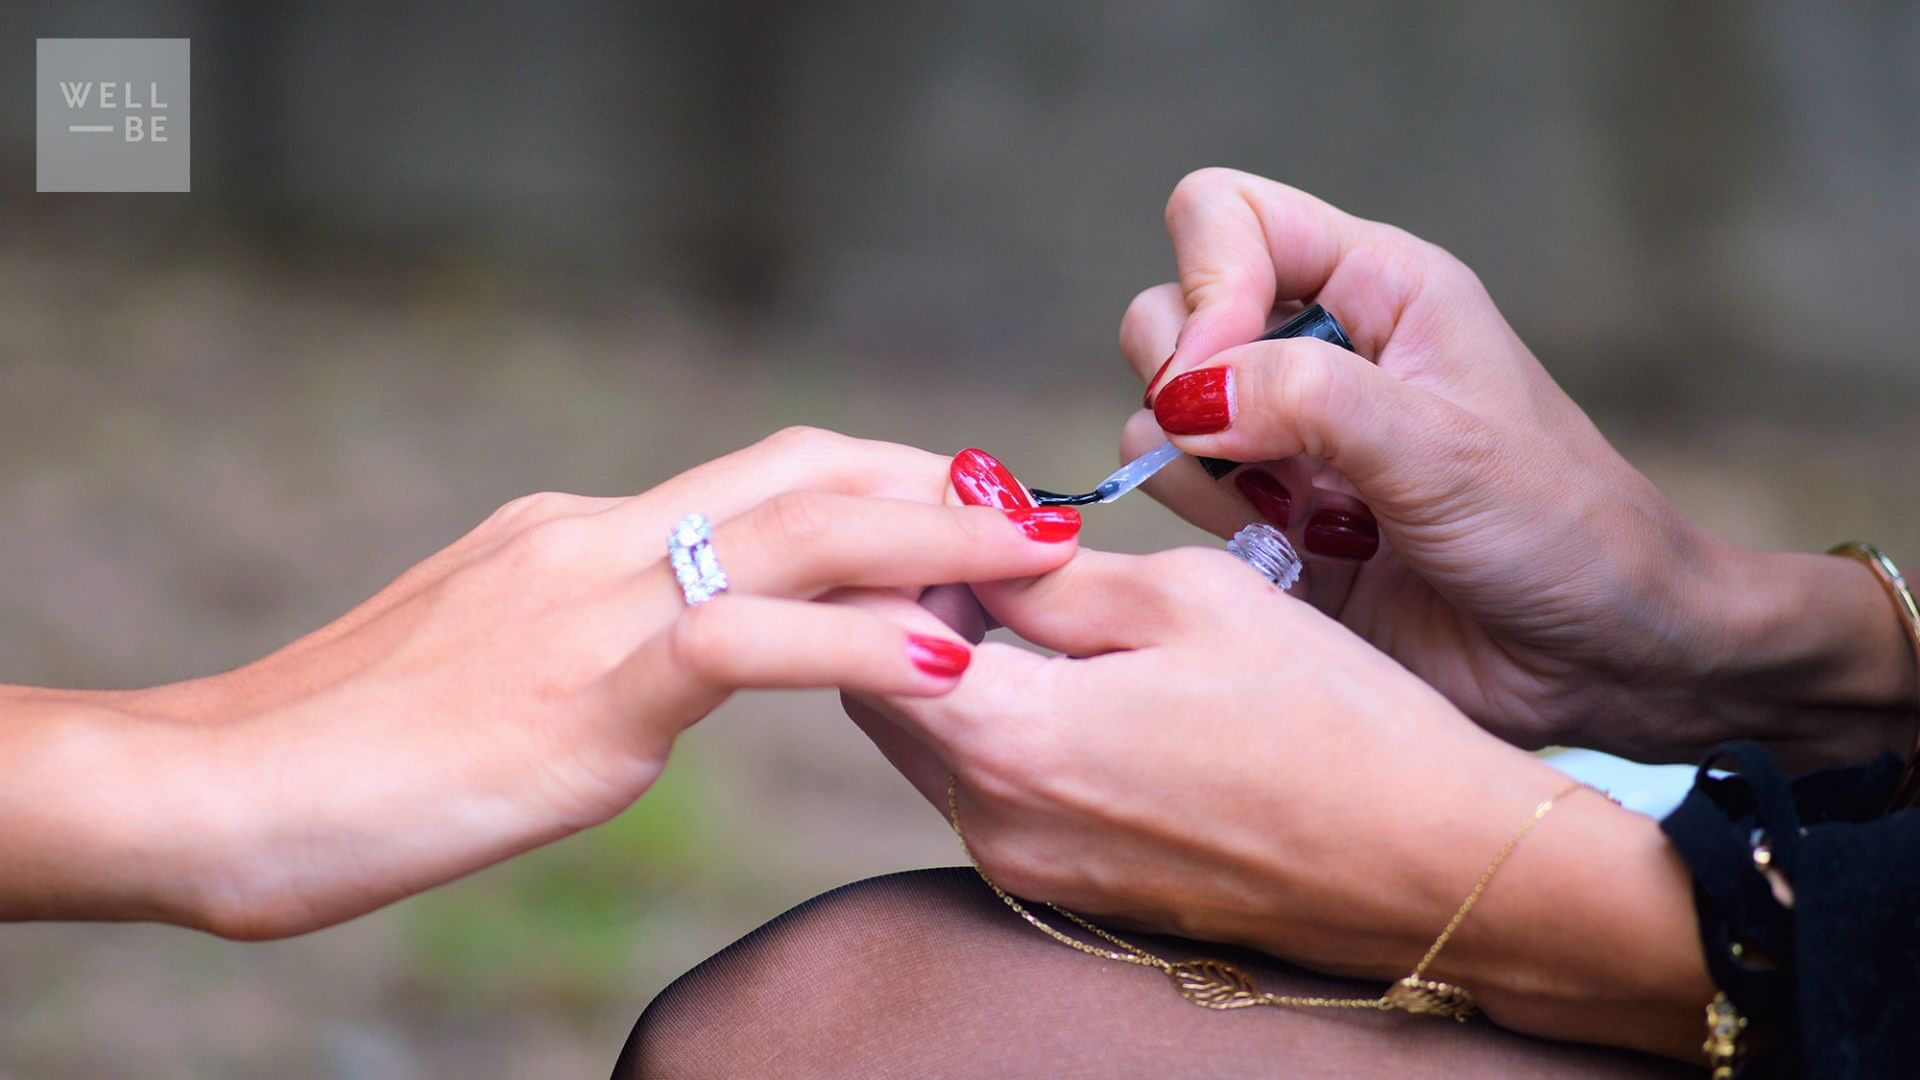 Healthy Nail Polish Guide: How to Get a Non-Toxic Mani